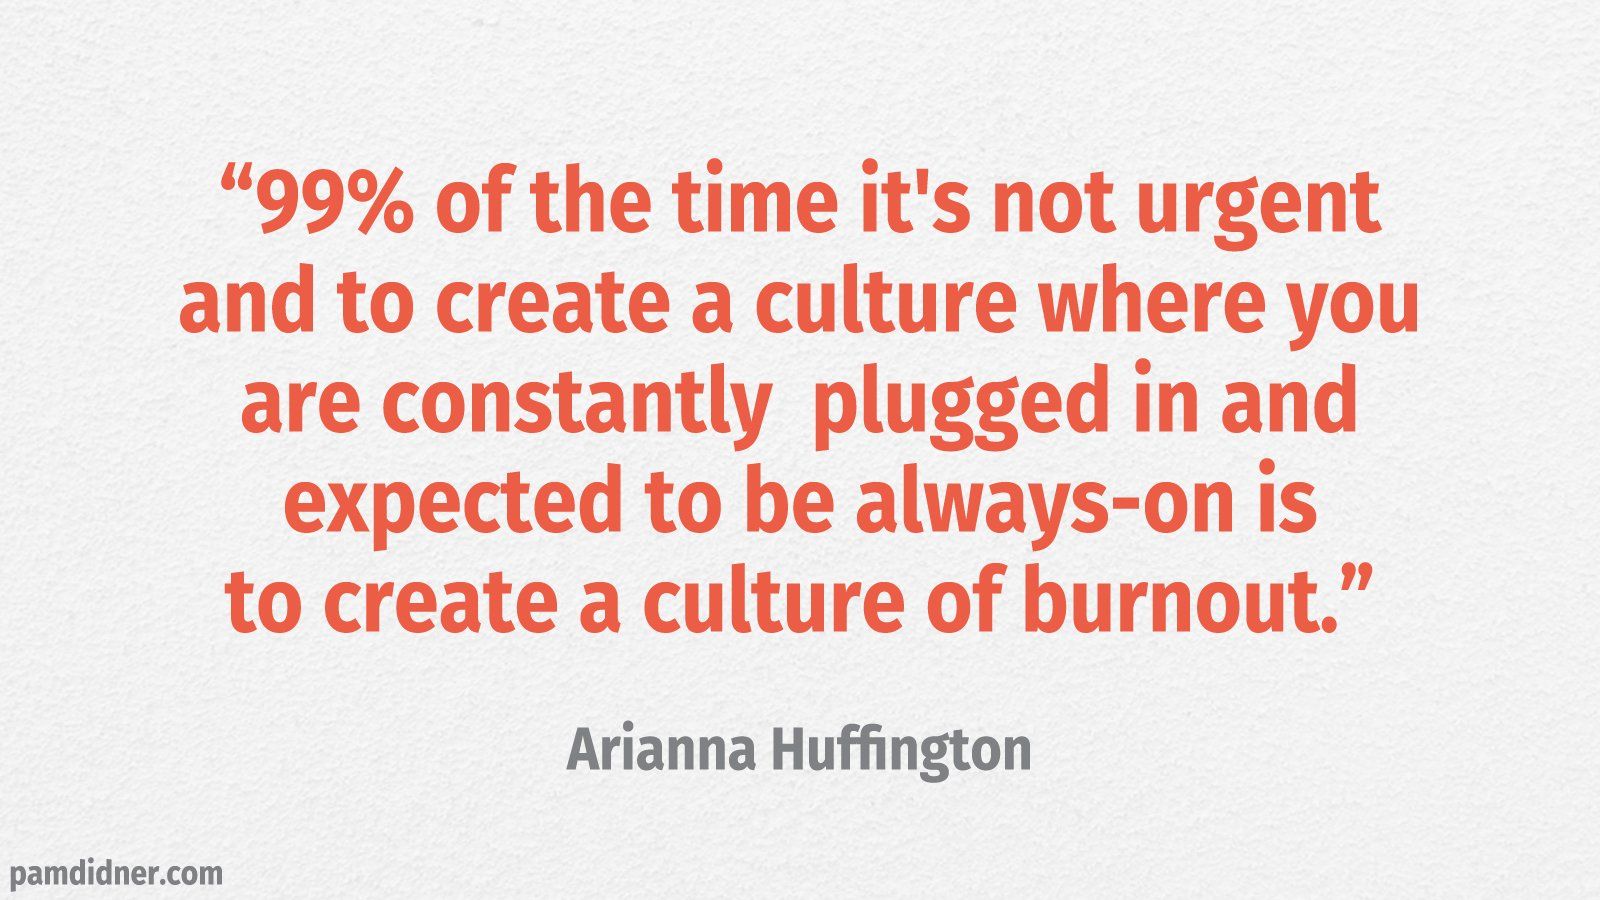 Business Burnoute Quote Arianna Huffington